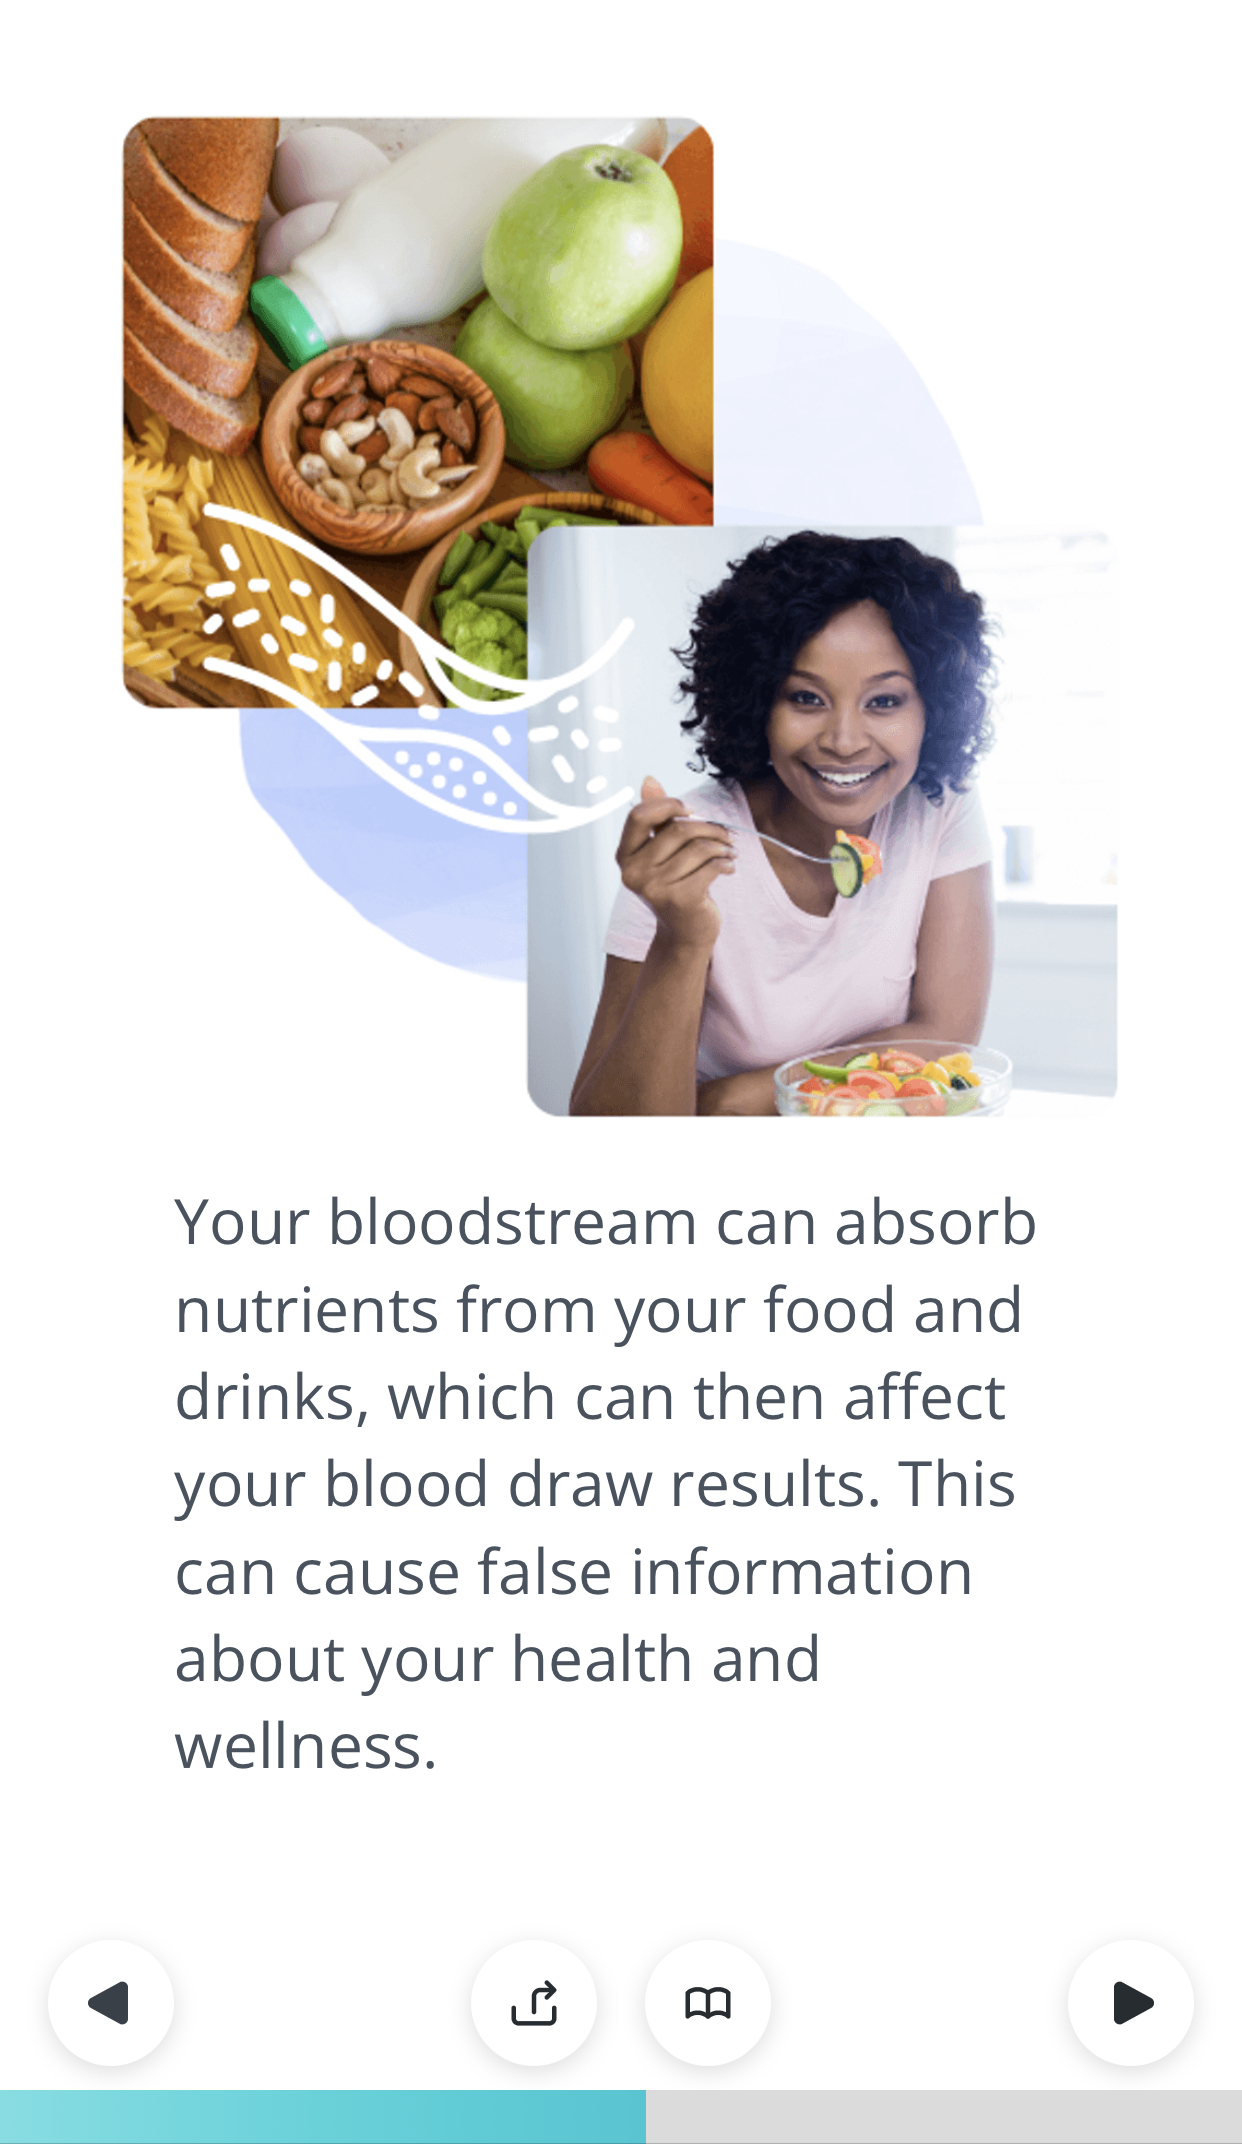 Your bloodstream can absorb nutrients from your food and drinks, which can then affect you blood draw results. This can cause false information about your health and wellness.